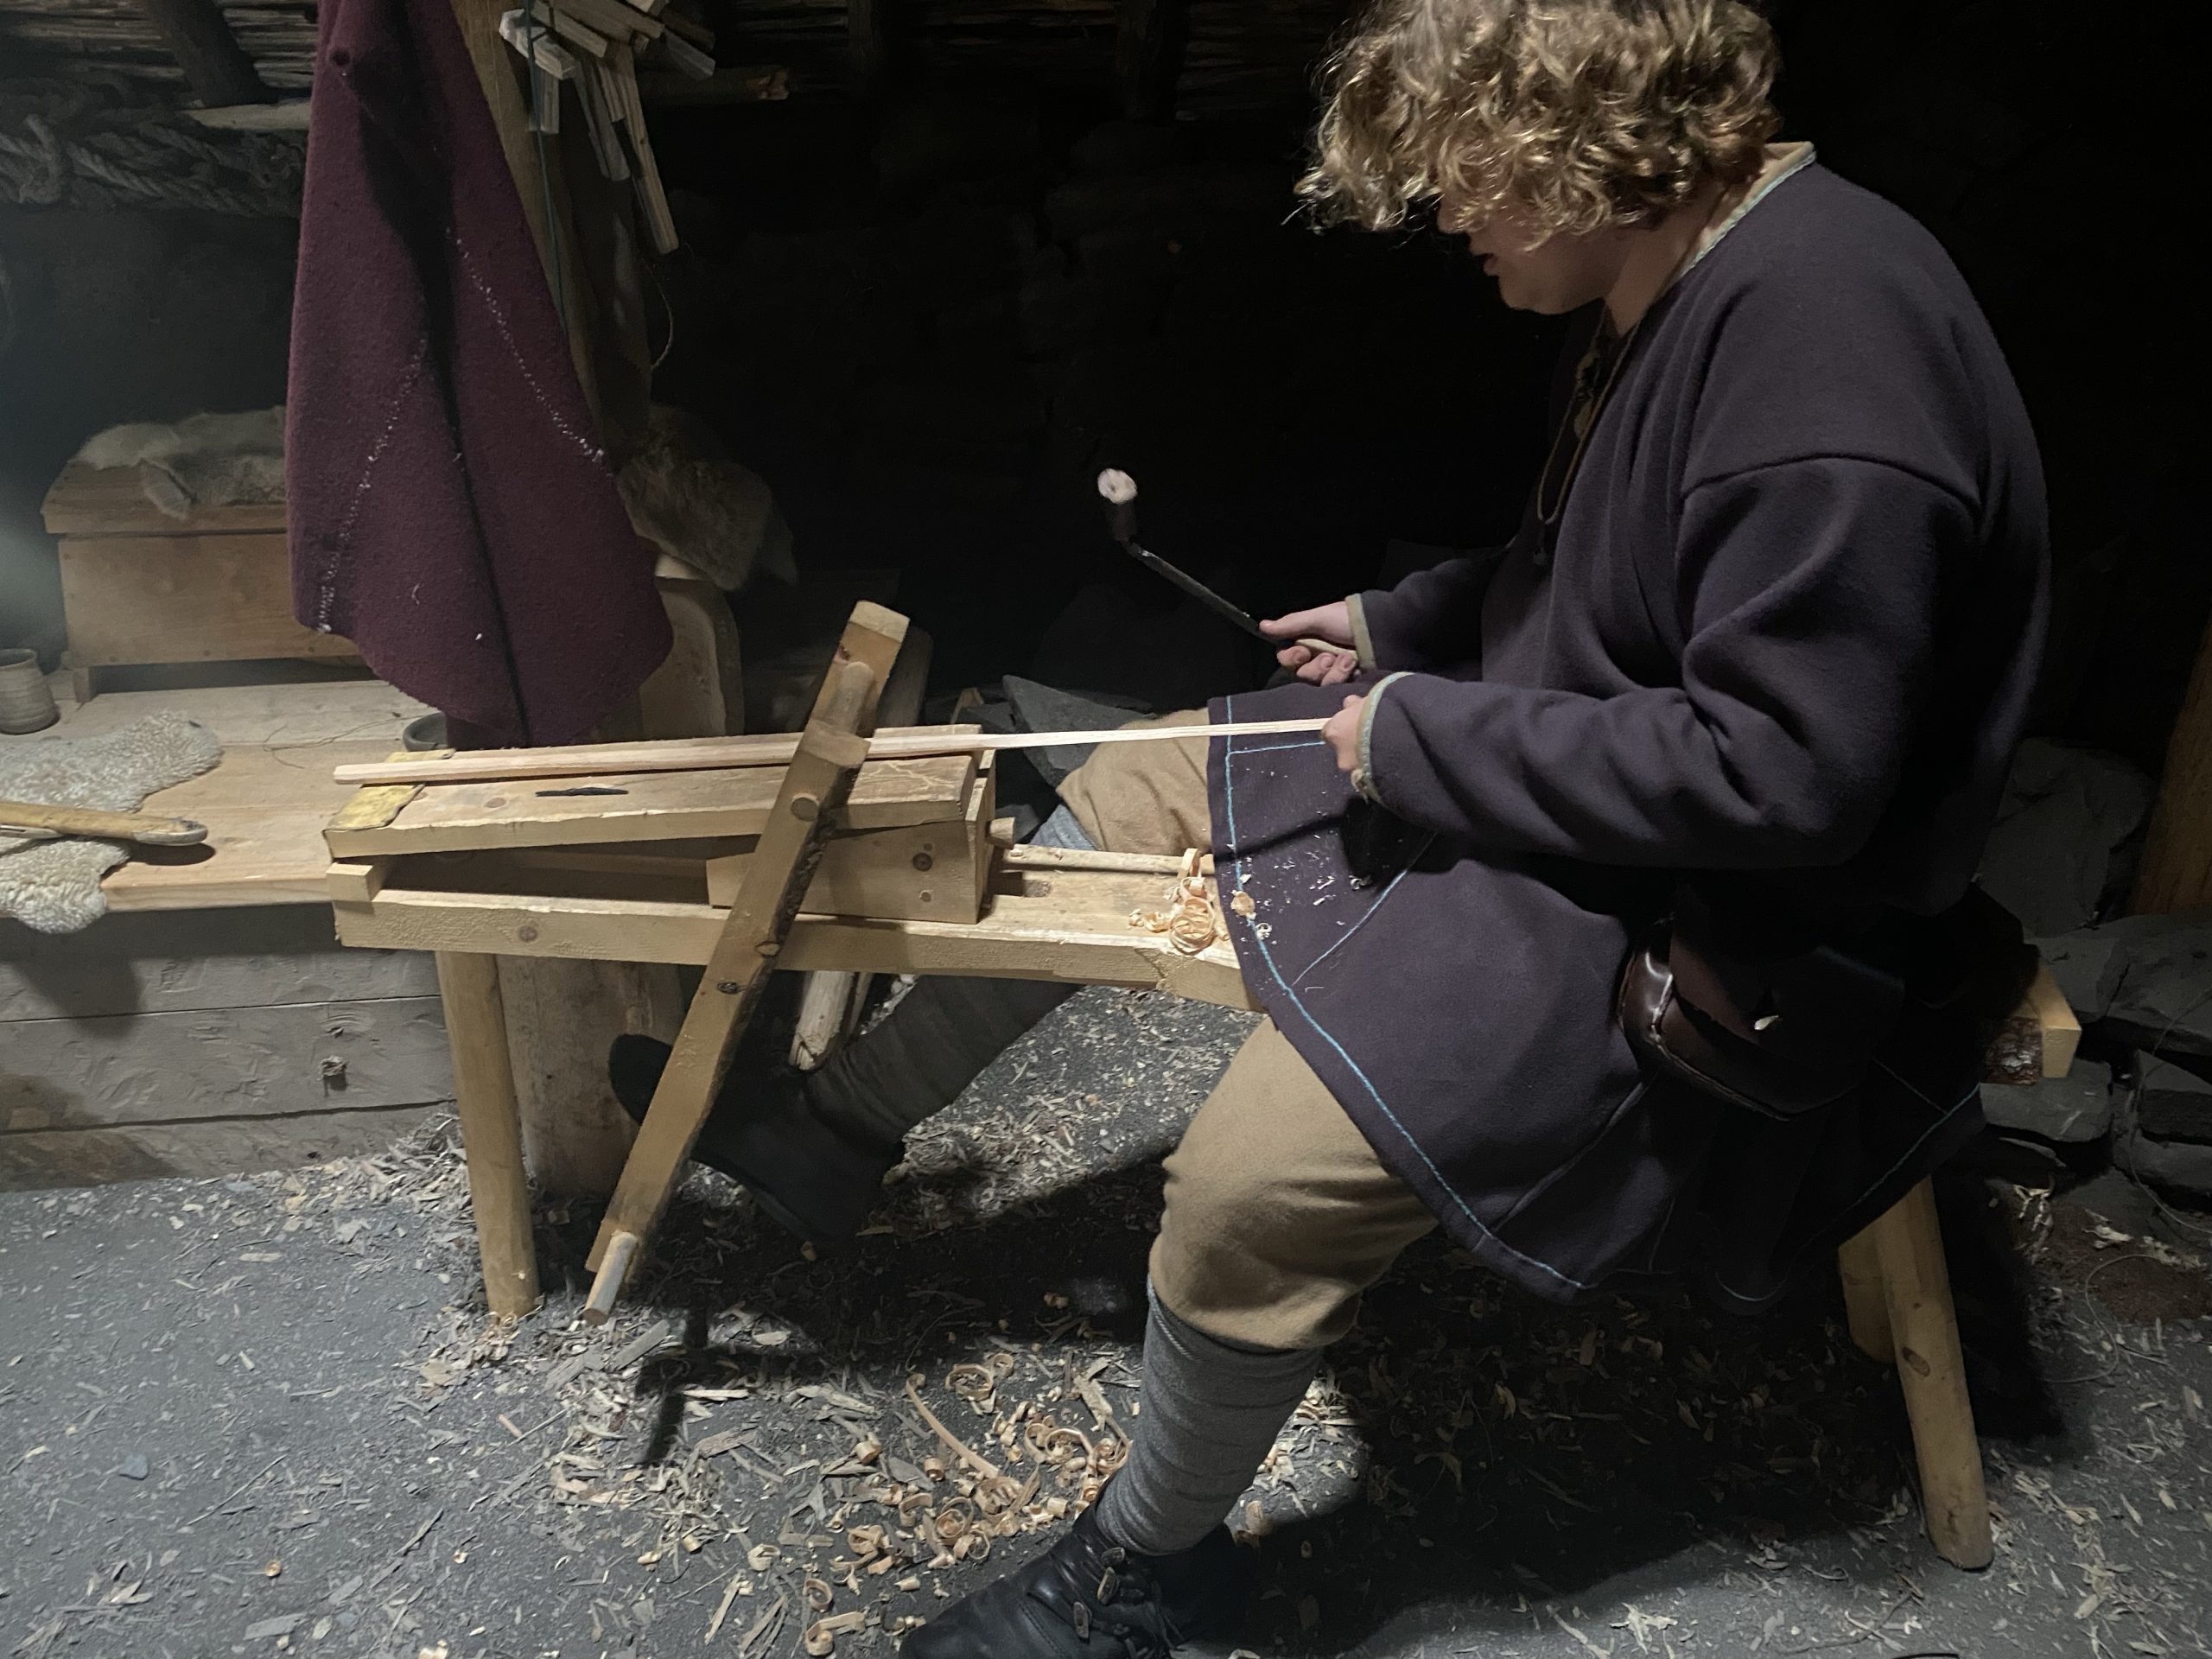 Working a piece of wood on an Norse wood vise in a recreation of a 1,000 year old sod house.